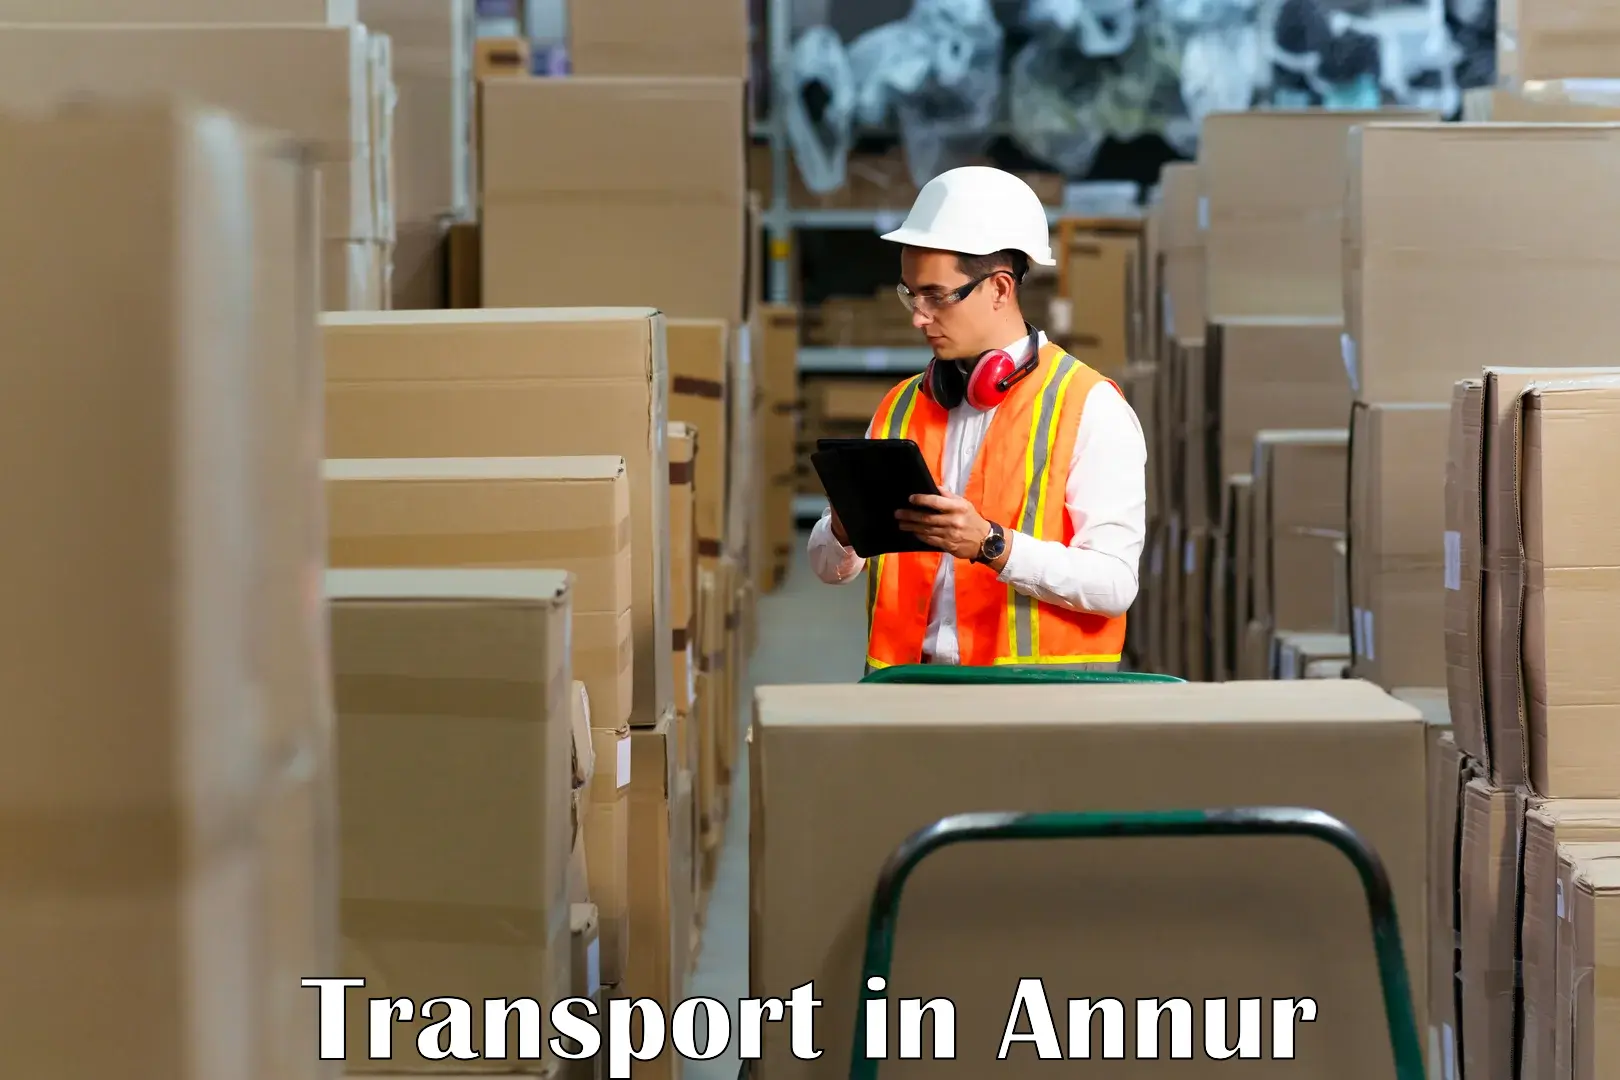 Express transport services in Annur